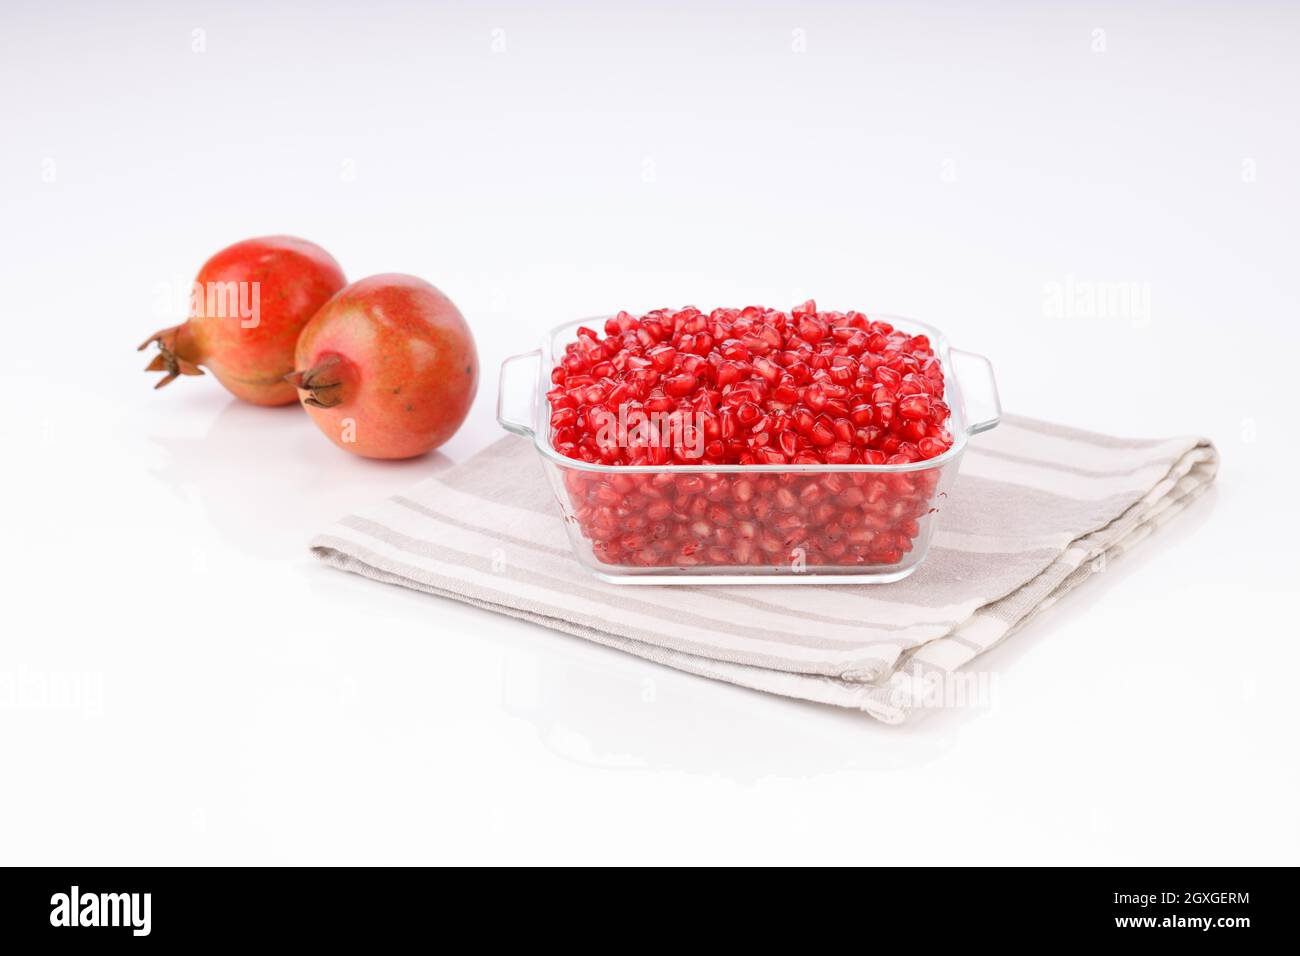 Fresh Pomegranate seed arranged in a square glass container with fresh fruit placed beside it on white background, isolated. Stock Photo